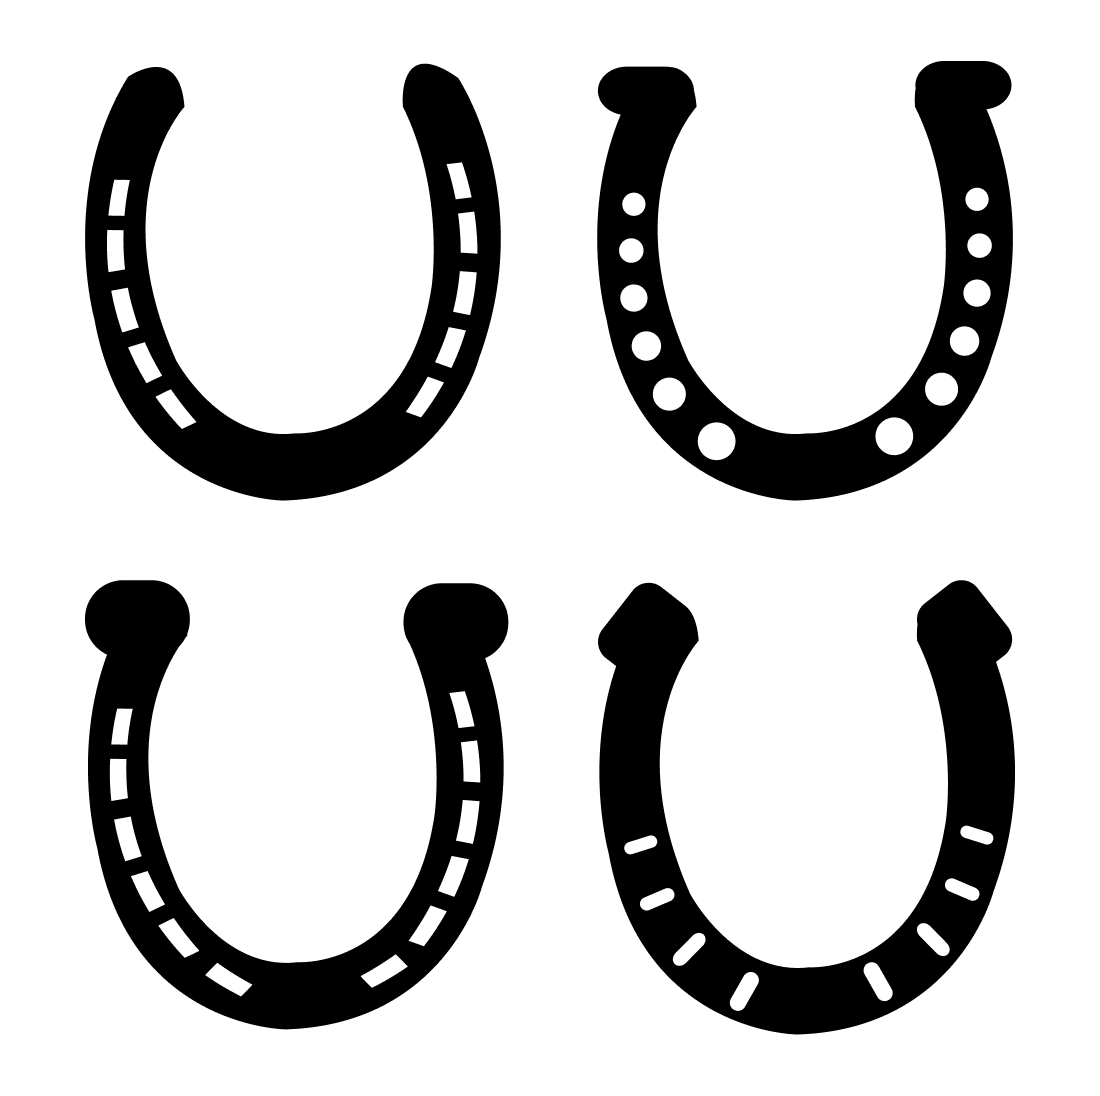 Horseshoes with round and elongated fastening.